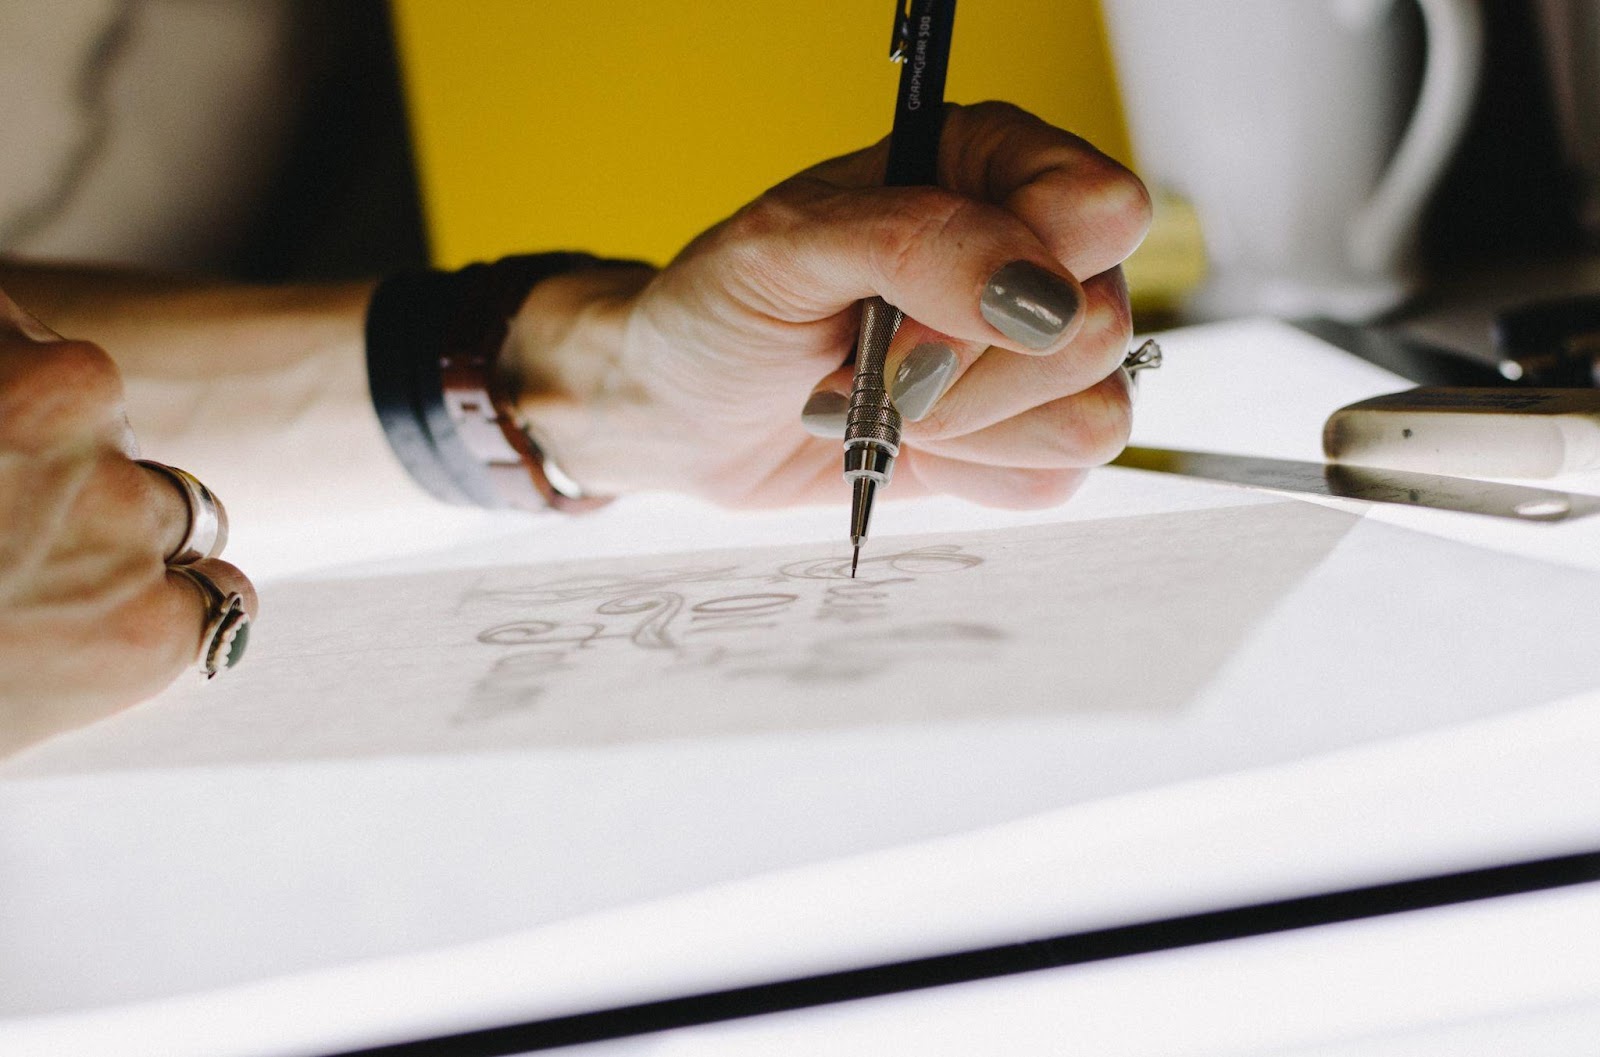 A picture of a person drawing design concepts on a table like Ann Dishinger does during her creative process.